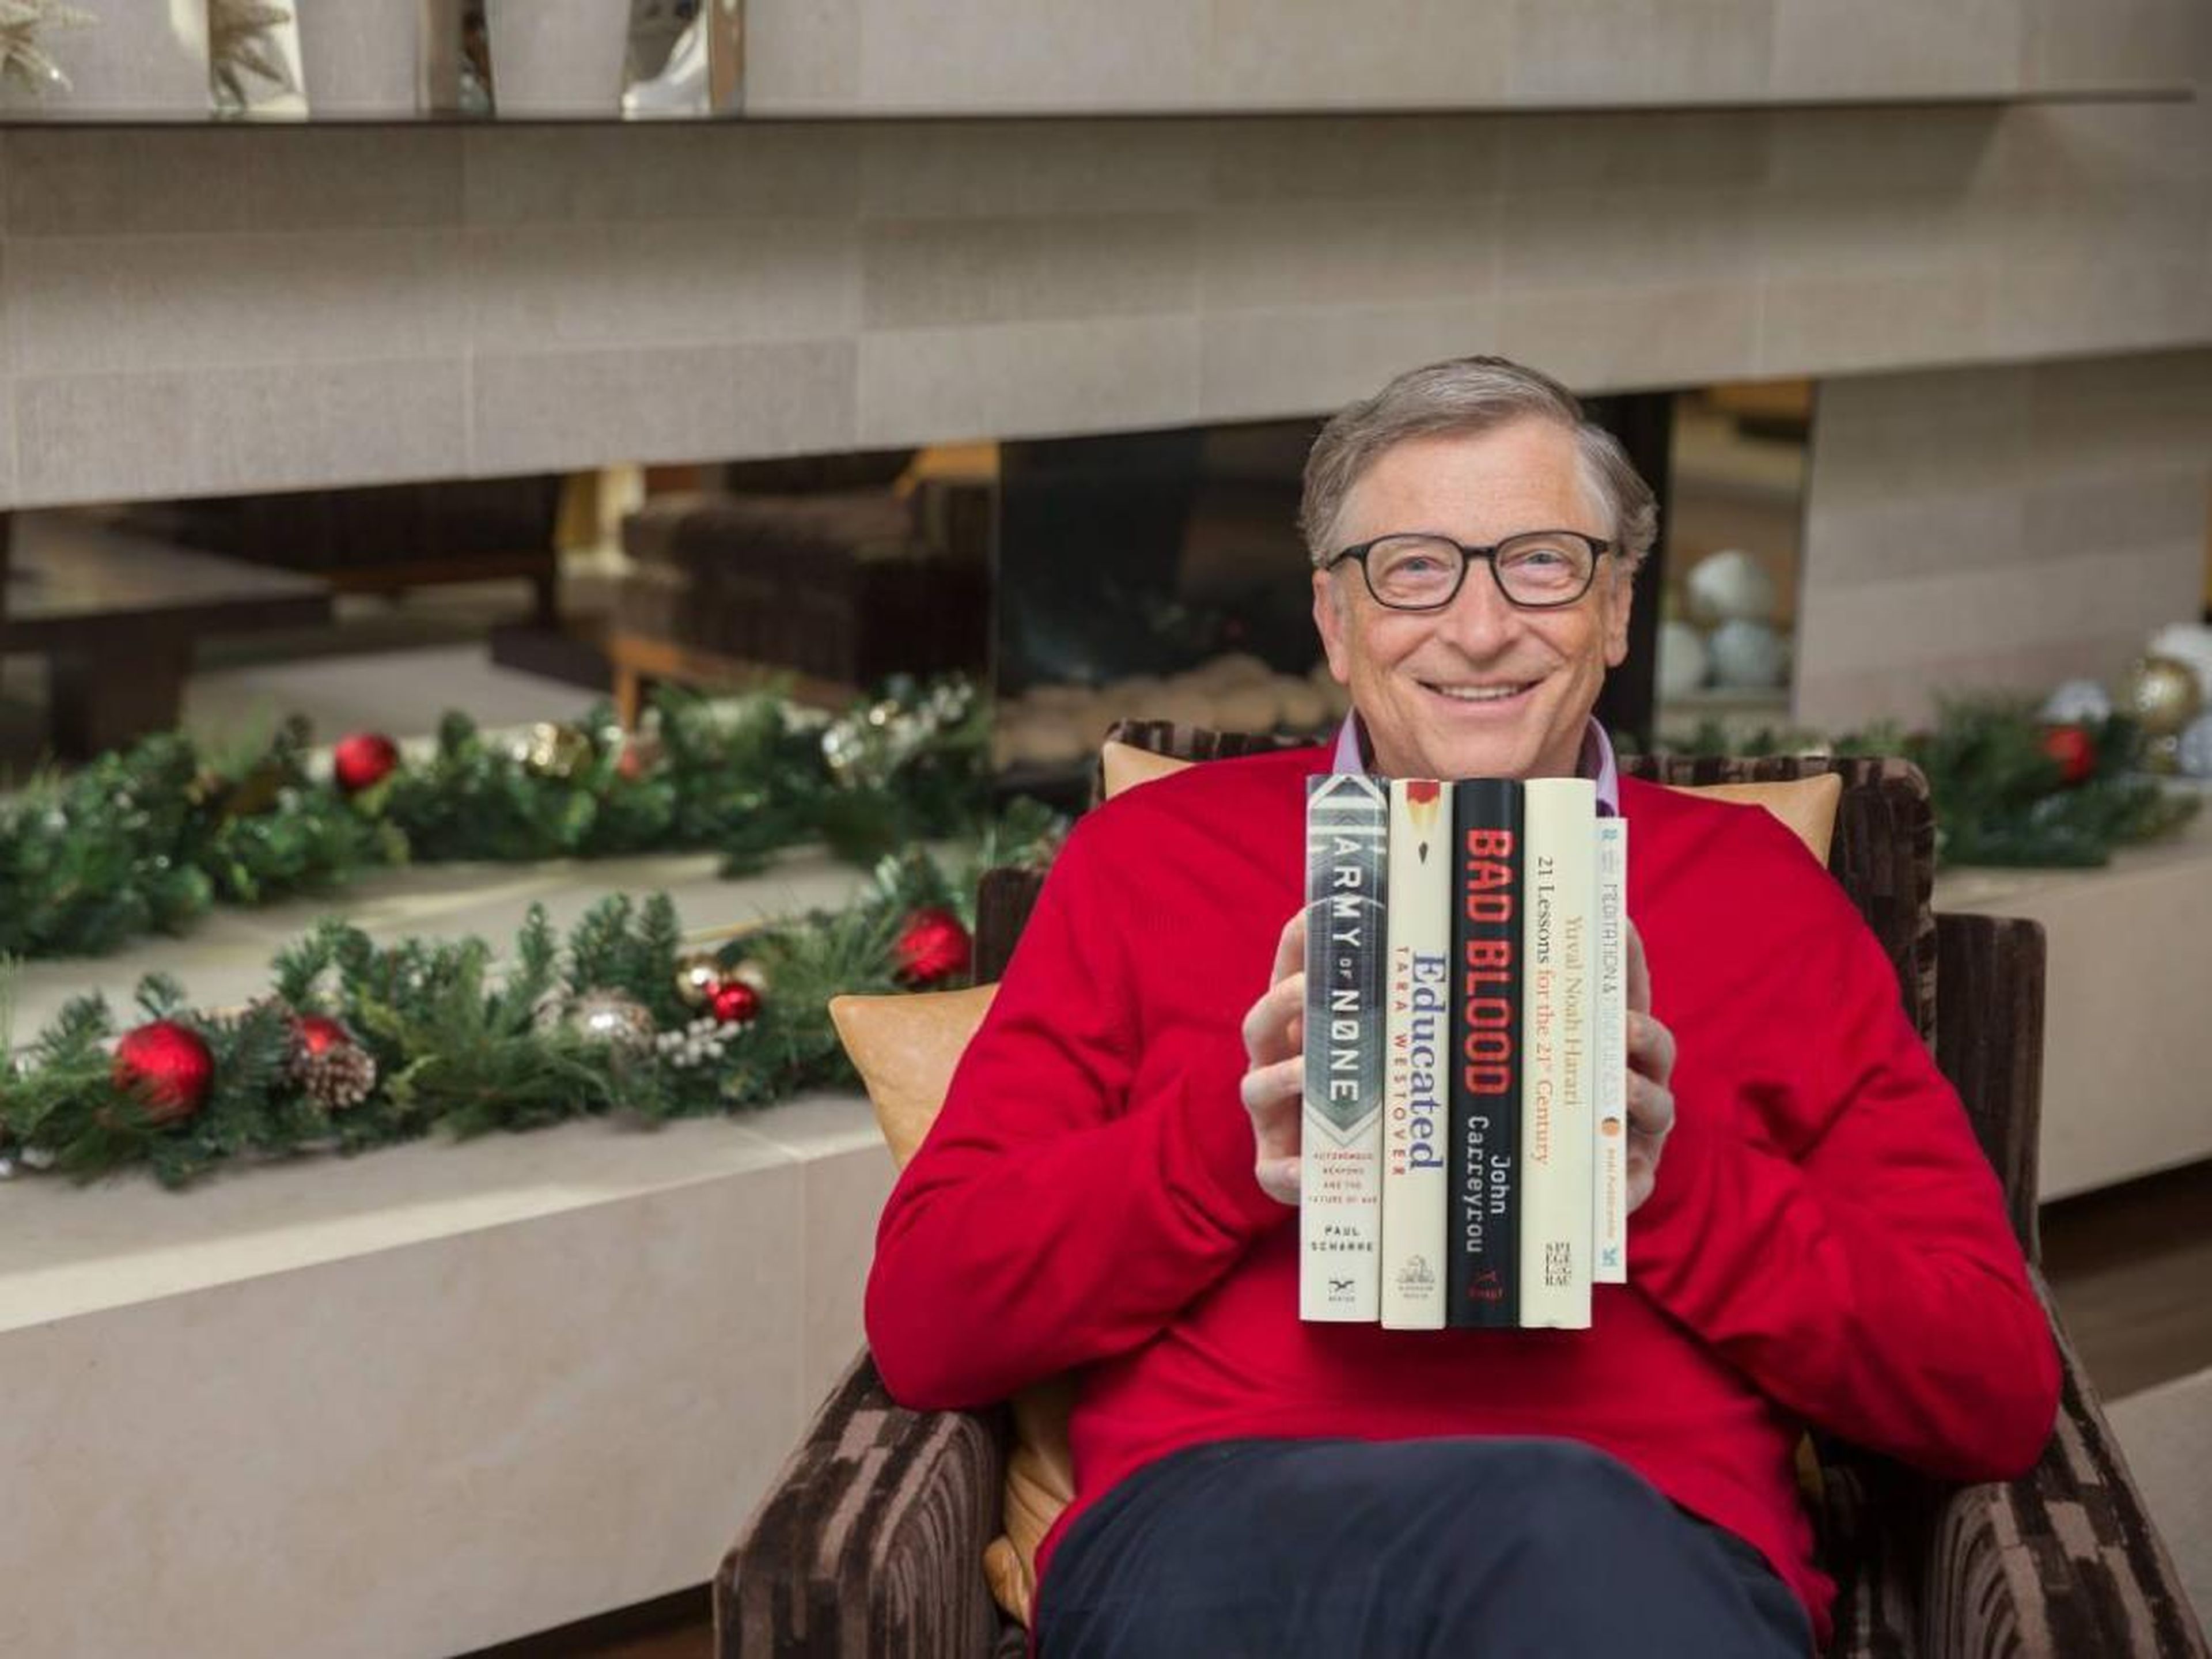 But Gates' downtime isn't always so adventurous. He's an avid reader, having indulged in quite the book collection.